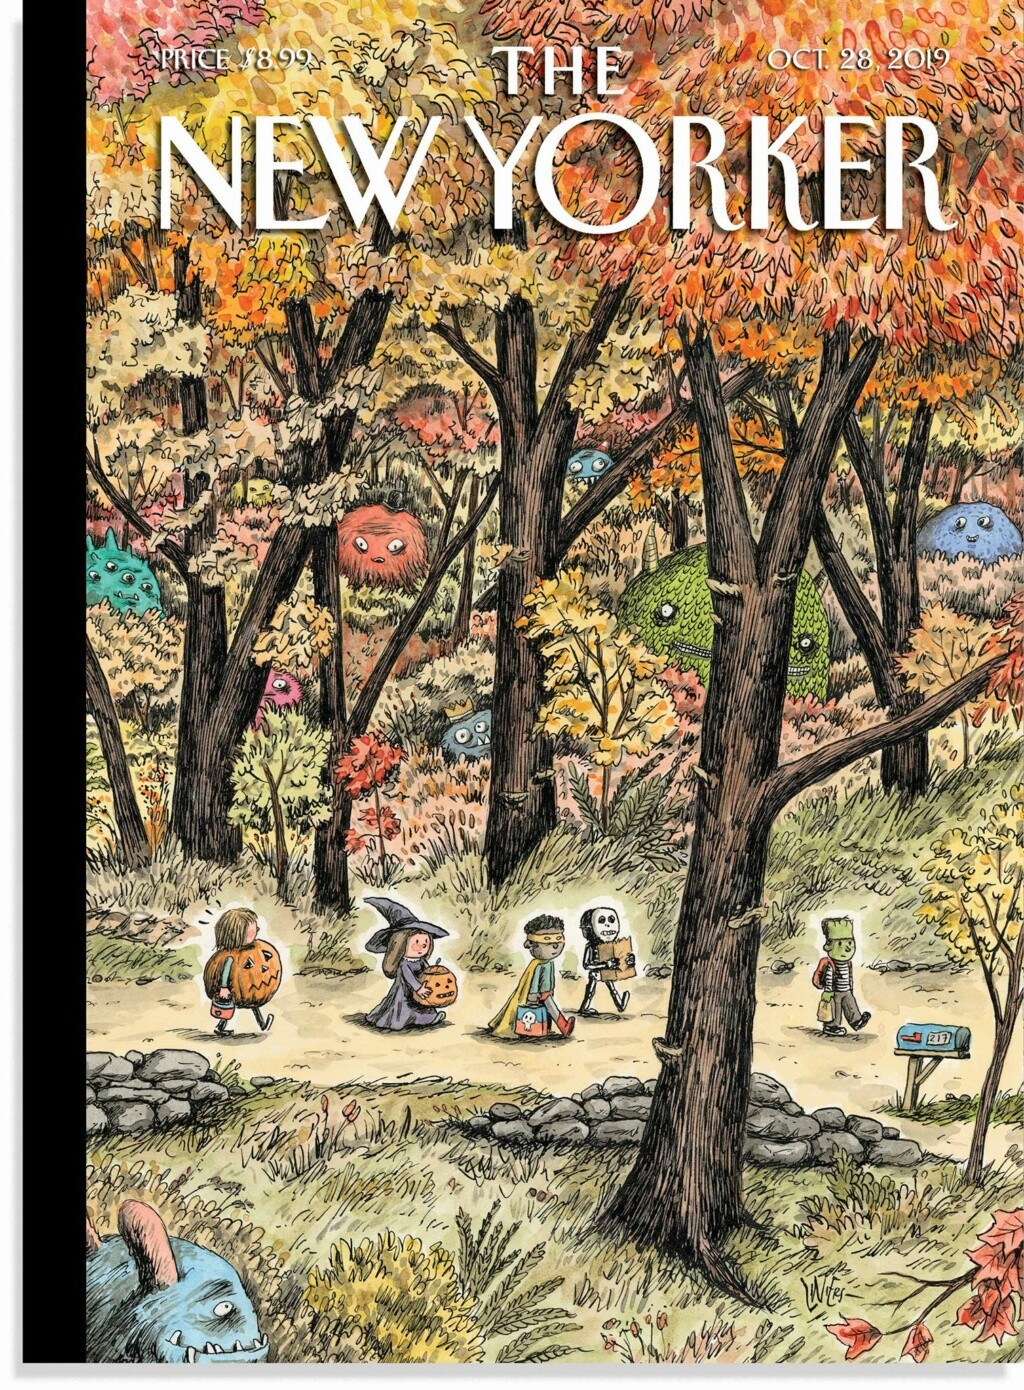 The New Yorker : Les couvertures - Page 2 Hallow17